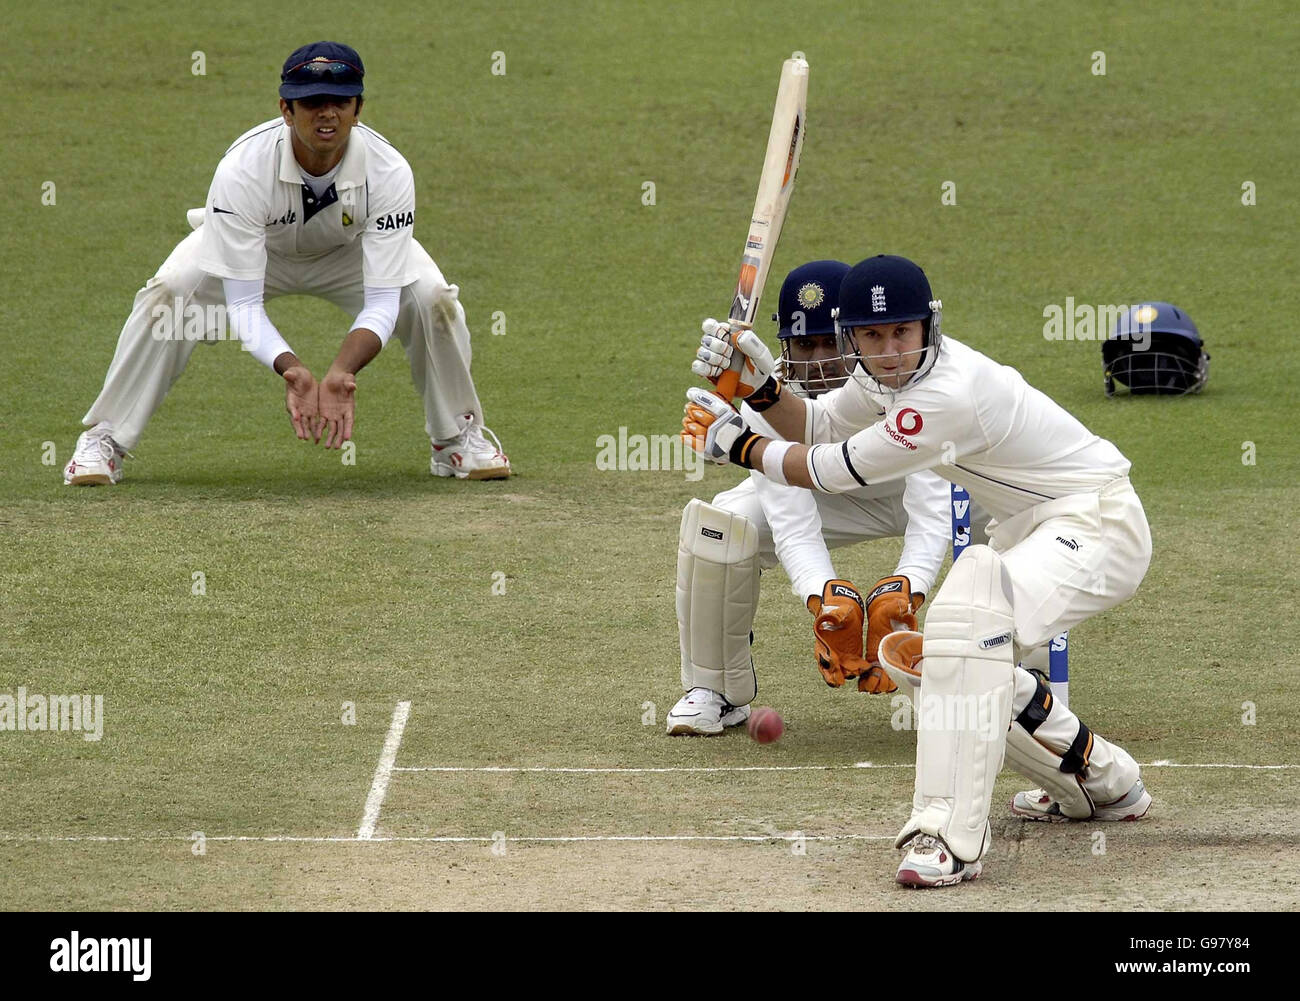 England's Geraint Jones hits the ball for four runs, during the third day of the second Test match against between India and England at the PCA Stadium, Mohali, India, Saturday March 11, 2006. PRESS ASSOCIATION Photo. Photo credit should read: Rebecca Naden/PA. Stock Photo